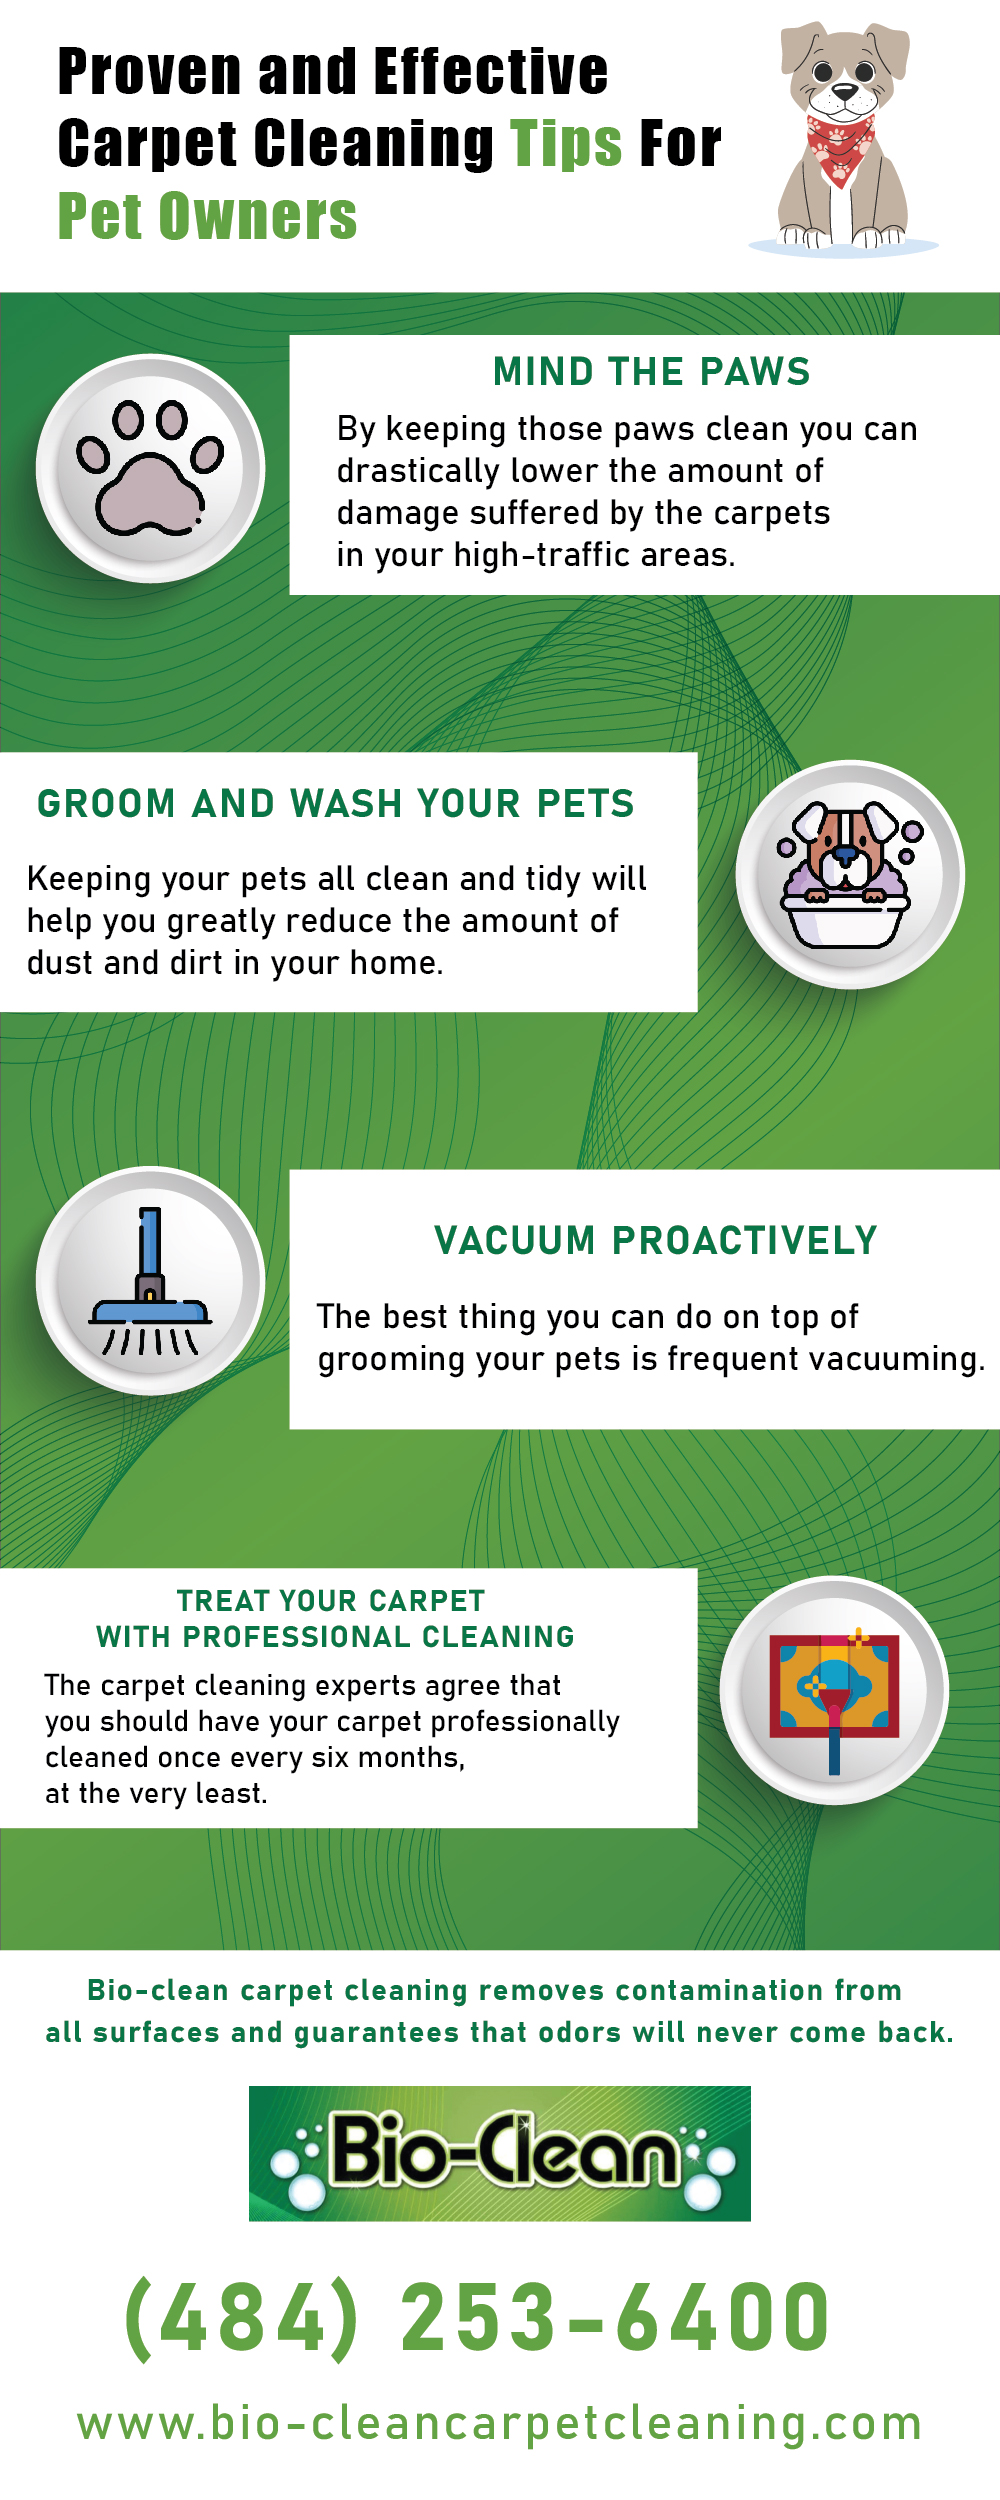 Pet Owners’ Guide to Keeping Carpets Clean and Odor-Free